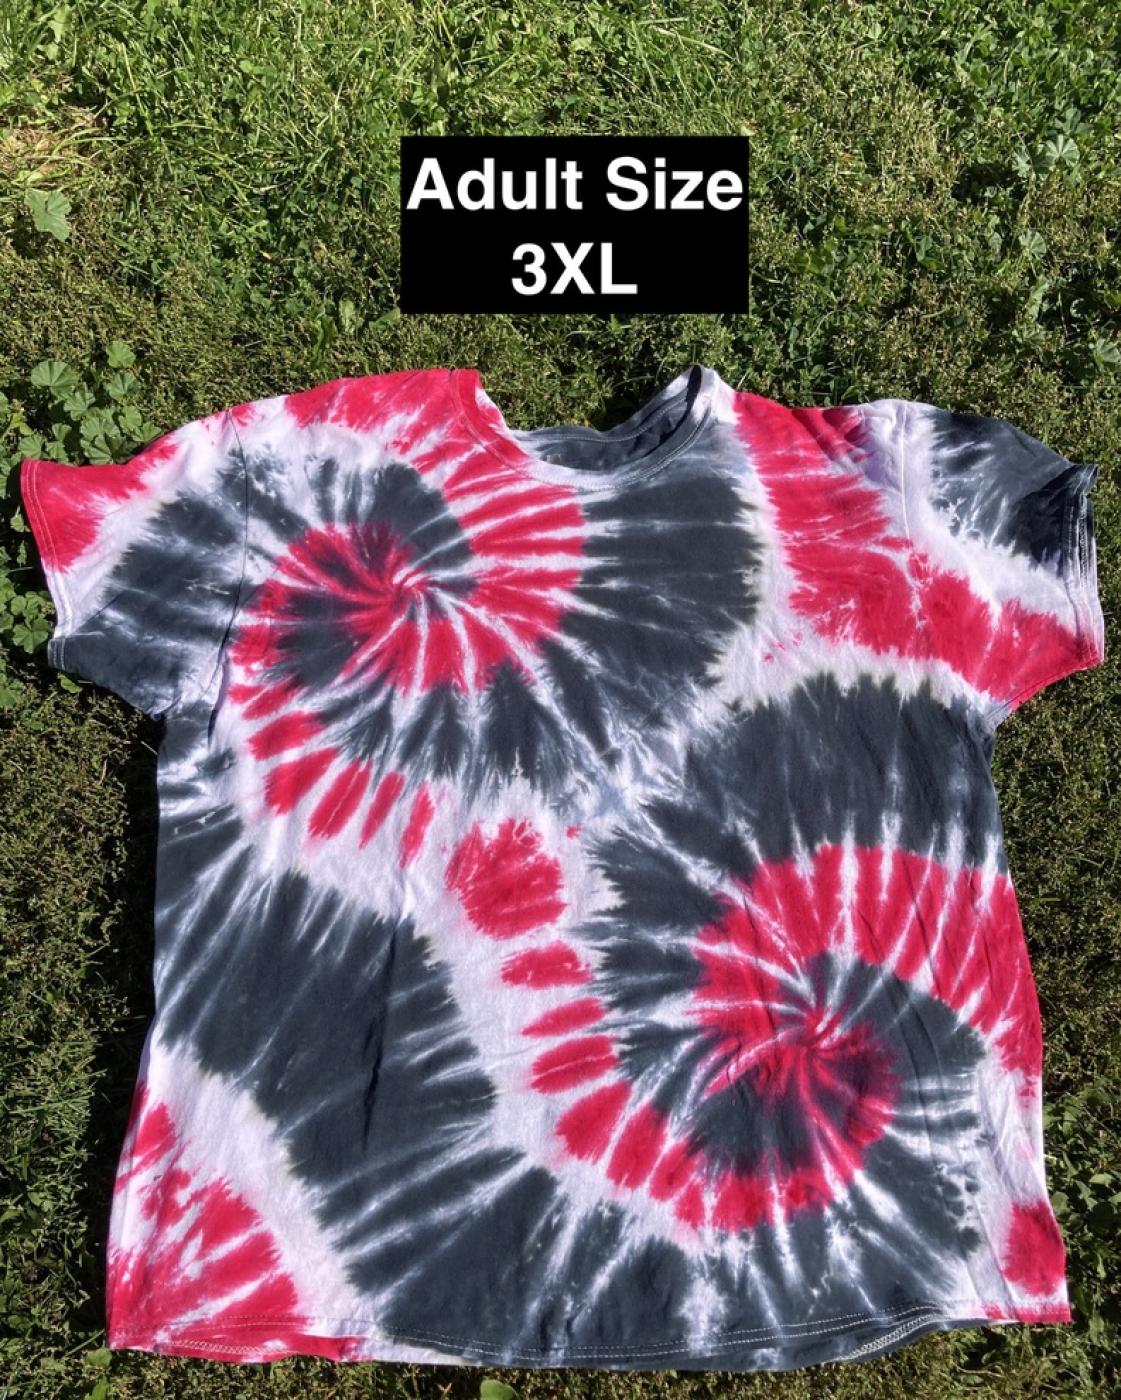 Red Black White Double Spiral Tie Dye T Shirt Adult 3XL